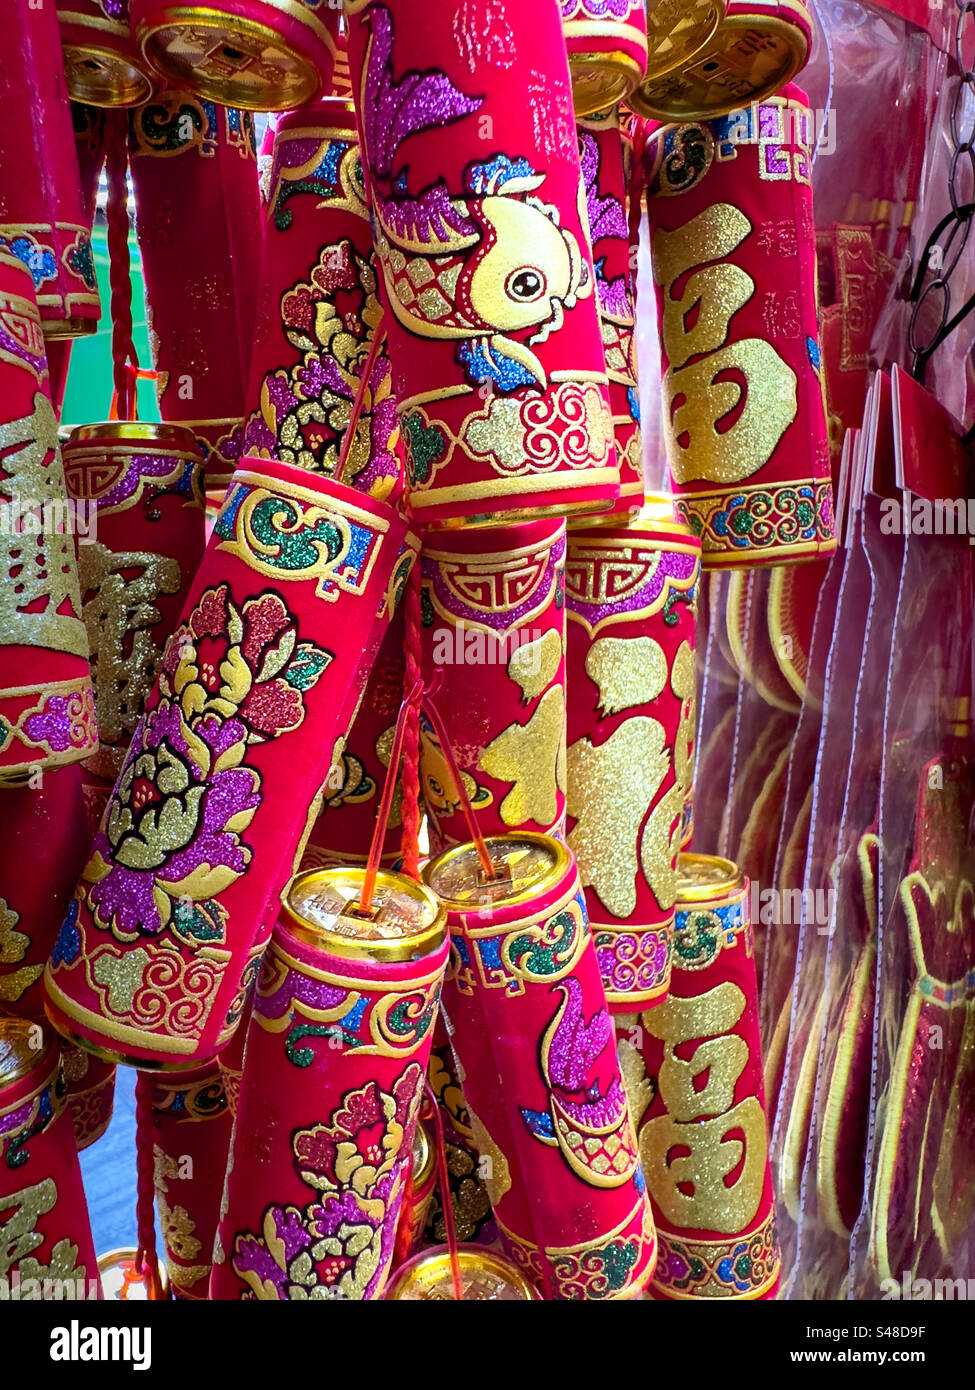 Chinese new years decorations on sale at local street market stall in Hong Kong Stock Photo